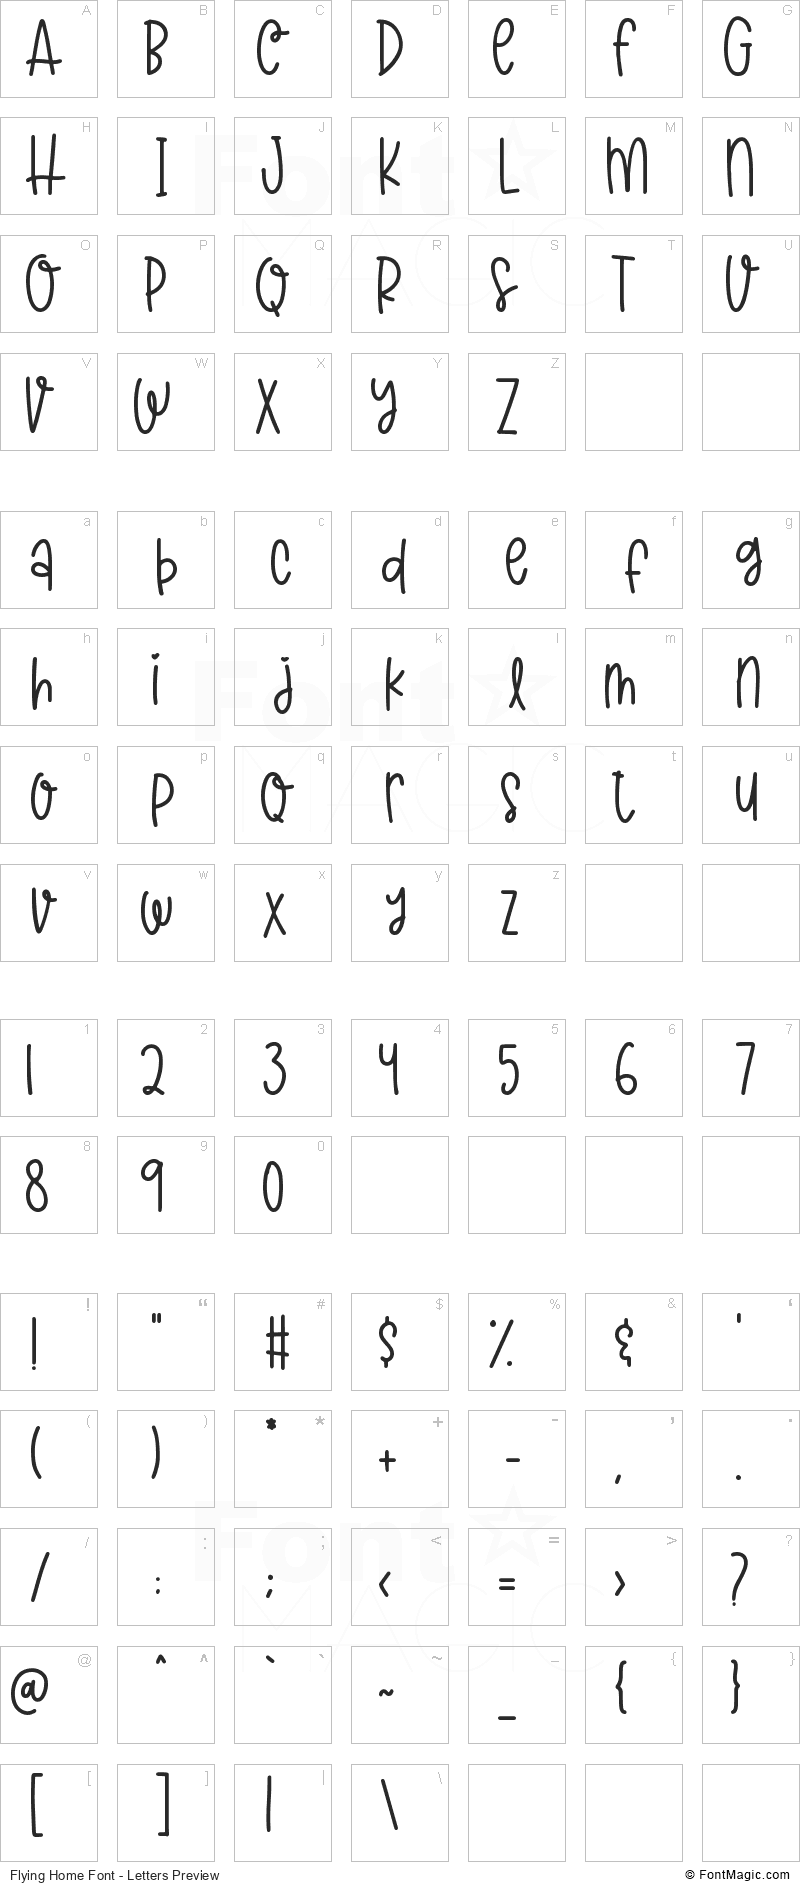 Flying Home Font - All Latters Preview Chart